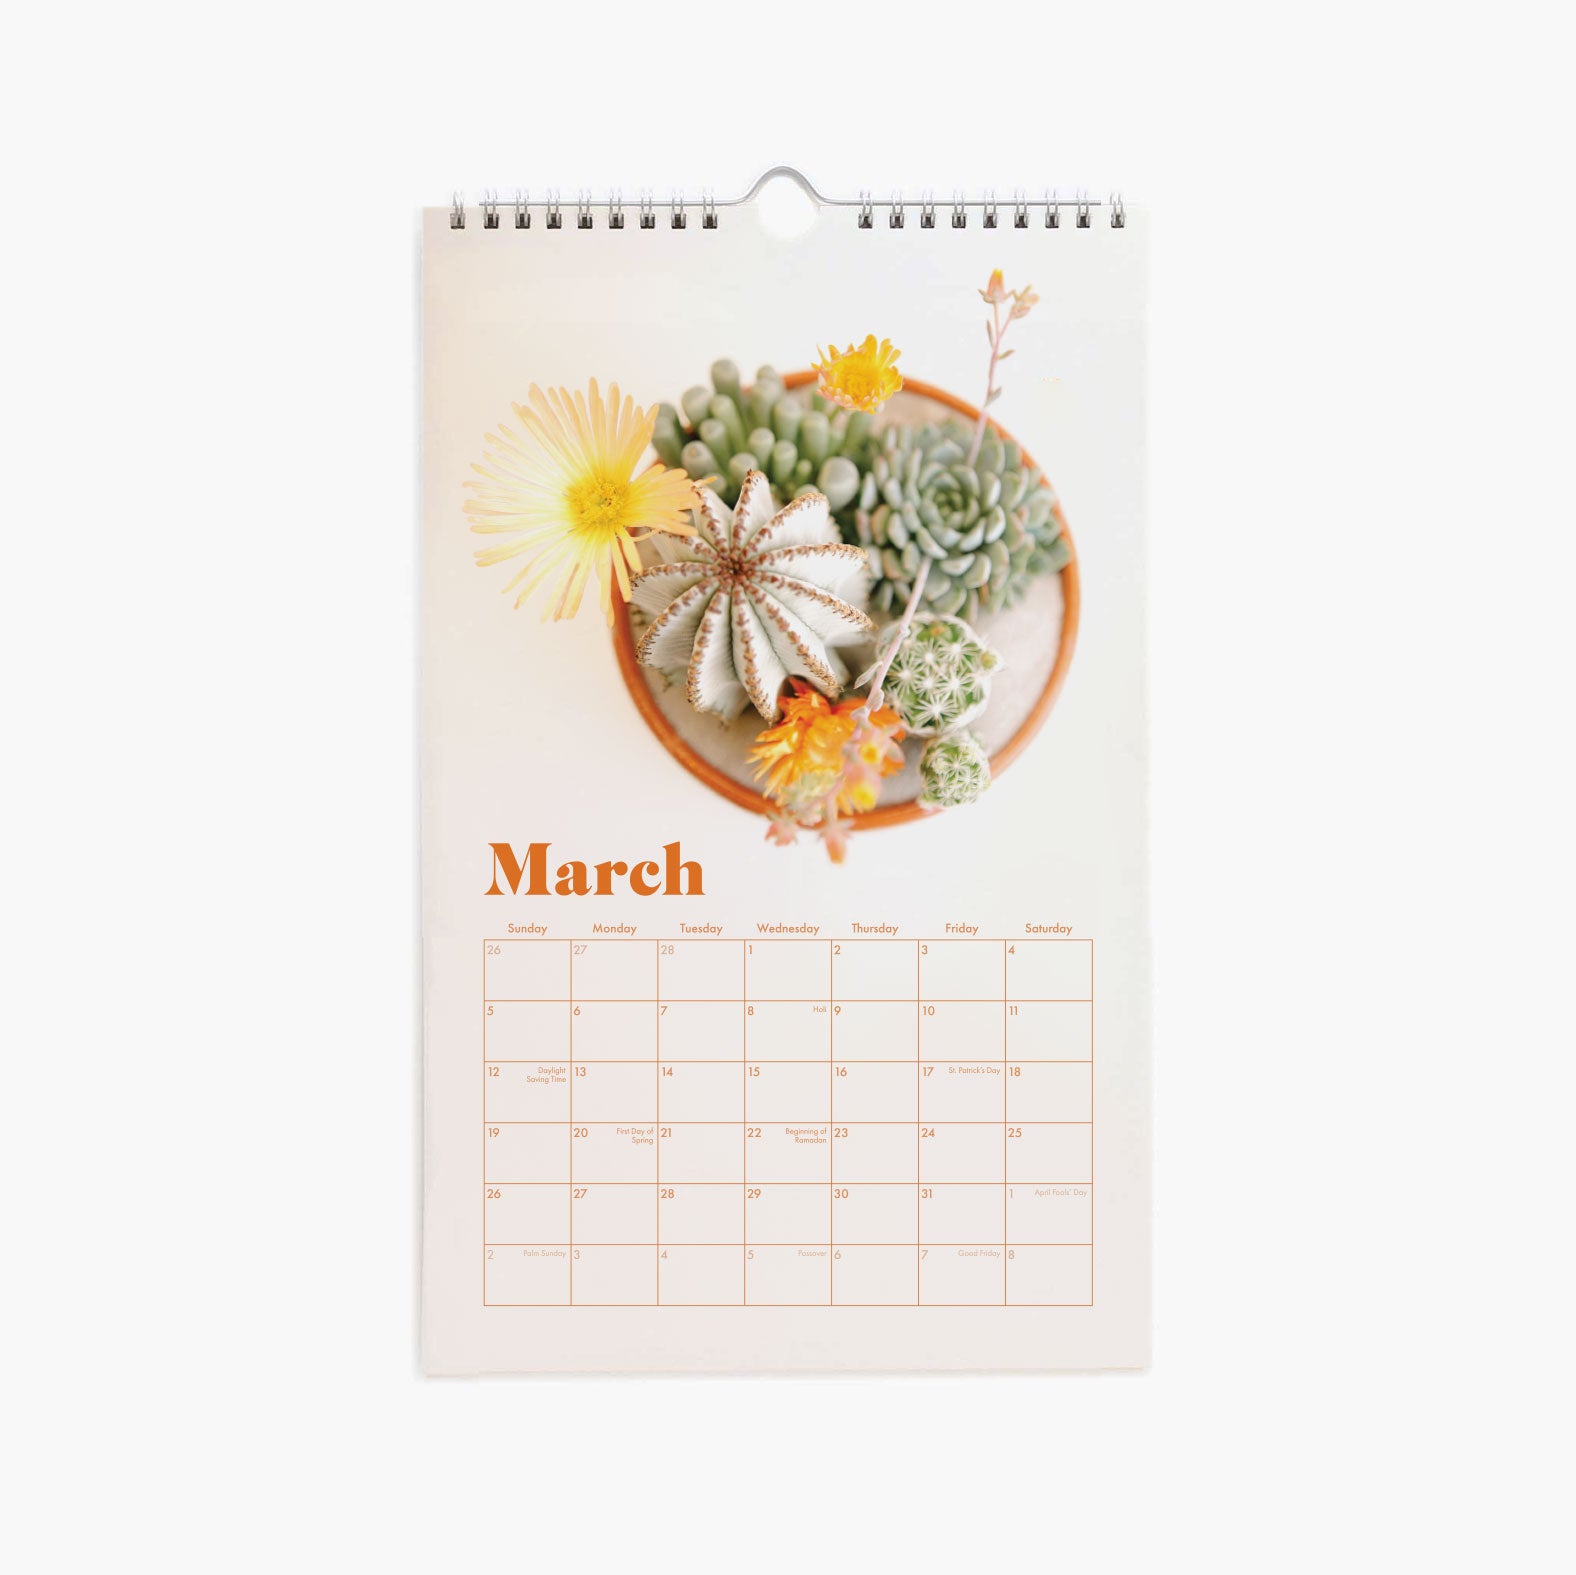 A spiral bound calendar with a cream front cover with a succulent and cacti arrangement photograph and "Desert Blooms 2023 Calendar" in burnt orange text on the top. The interior features a monthly calendar layout accompanied by a different succulent or cacti photograph on each month's page.